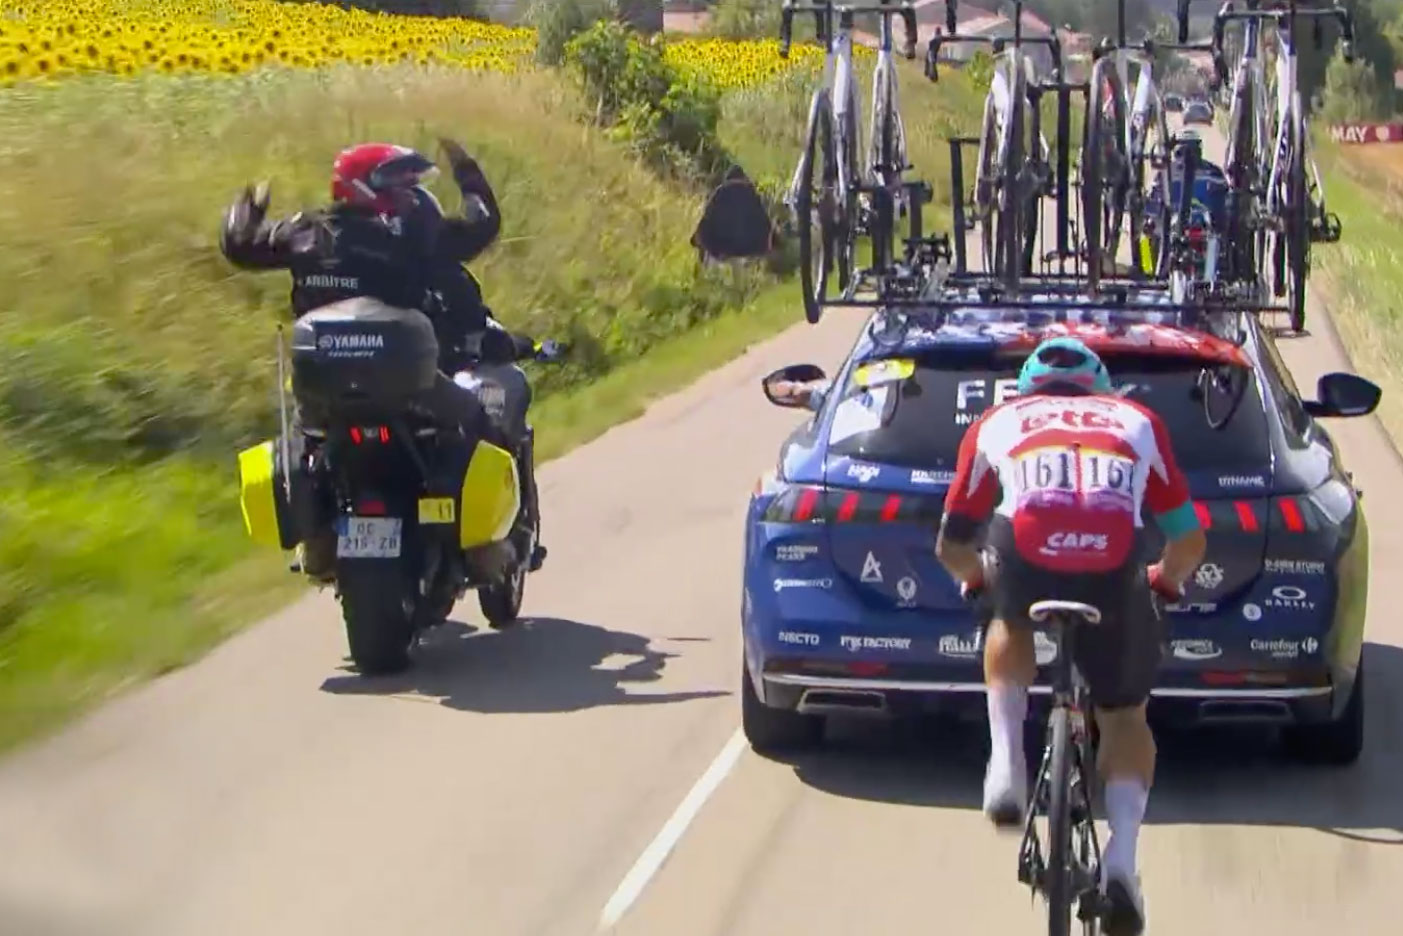 Ewan and the Alpecin-Deceuninck car at the 2022 Tour de France stage 13 with the UCI commissaire